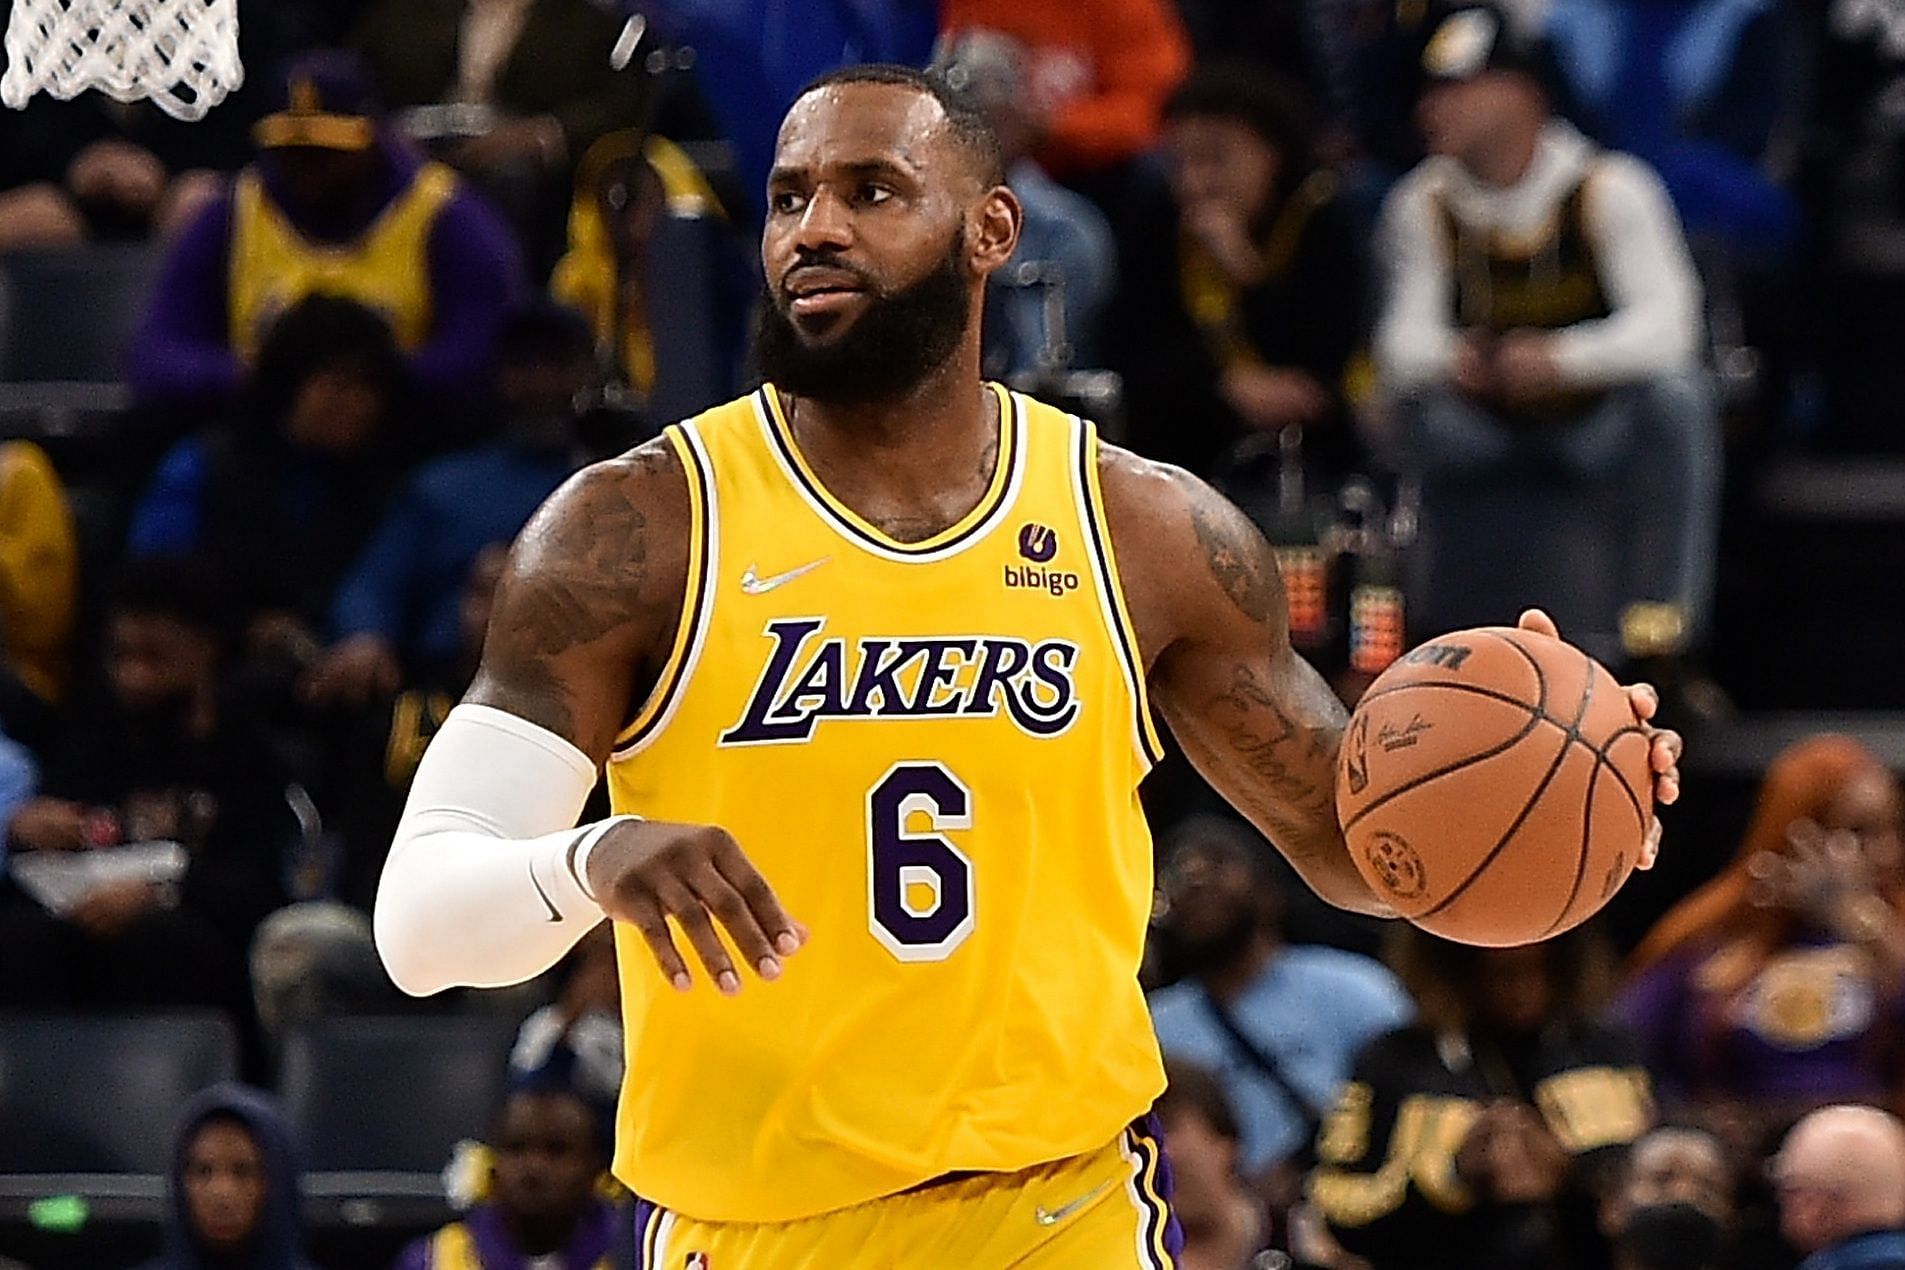 The LA Lakers&#039; roster could be very different next season if they want to keep LeBron James happy. [Photo: Bleacher Report]